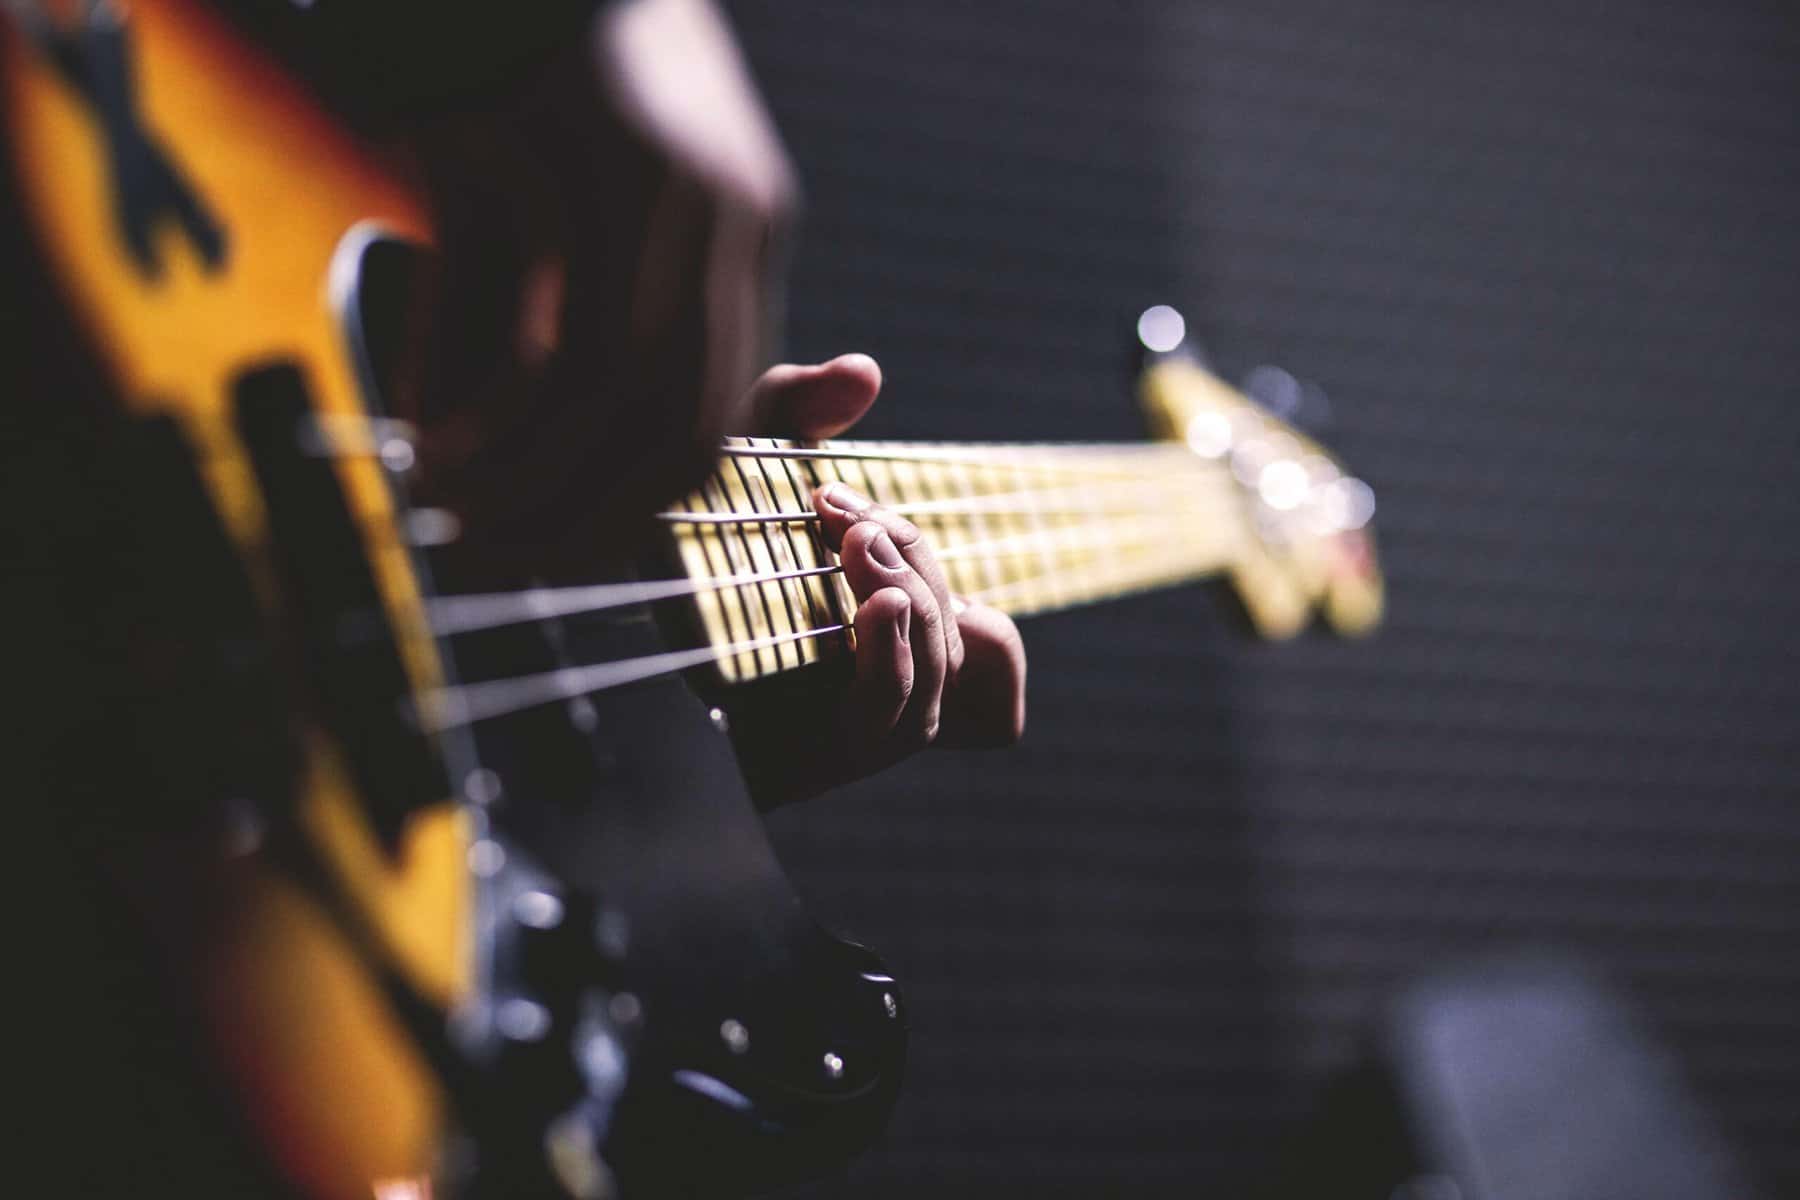 A guitar being played is seen close up from it's widest end with the players strumming hand out of focus and their fret hand in focus.